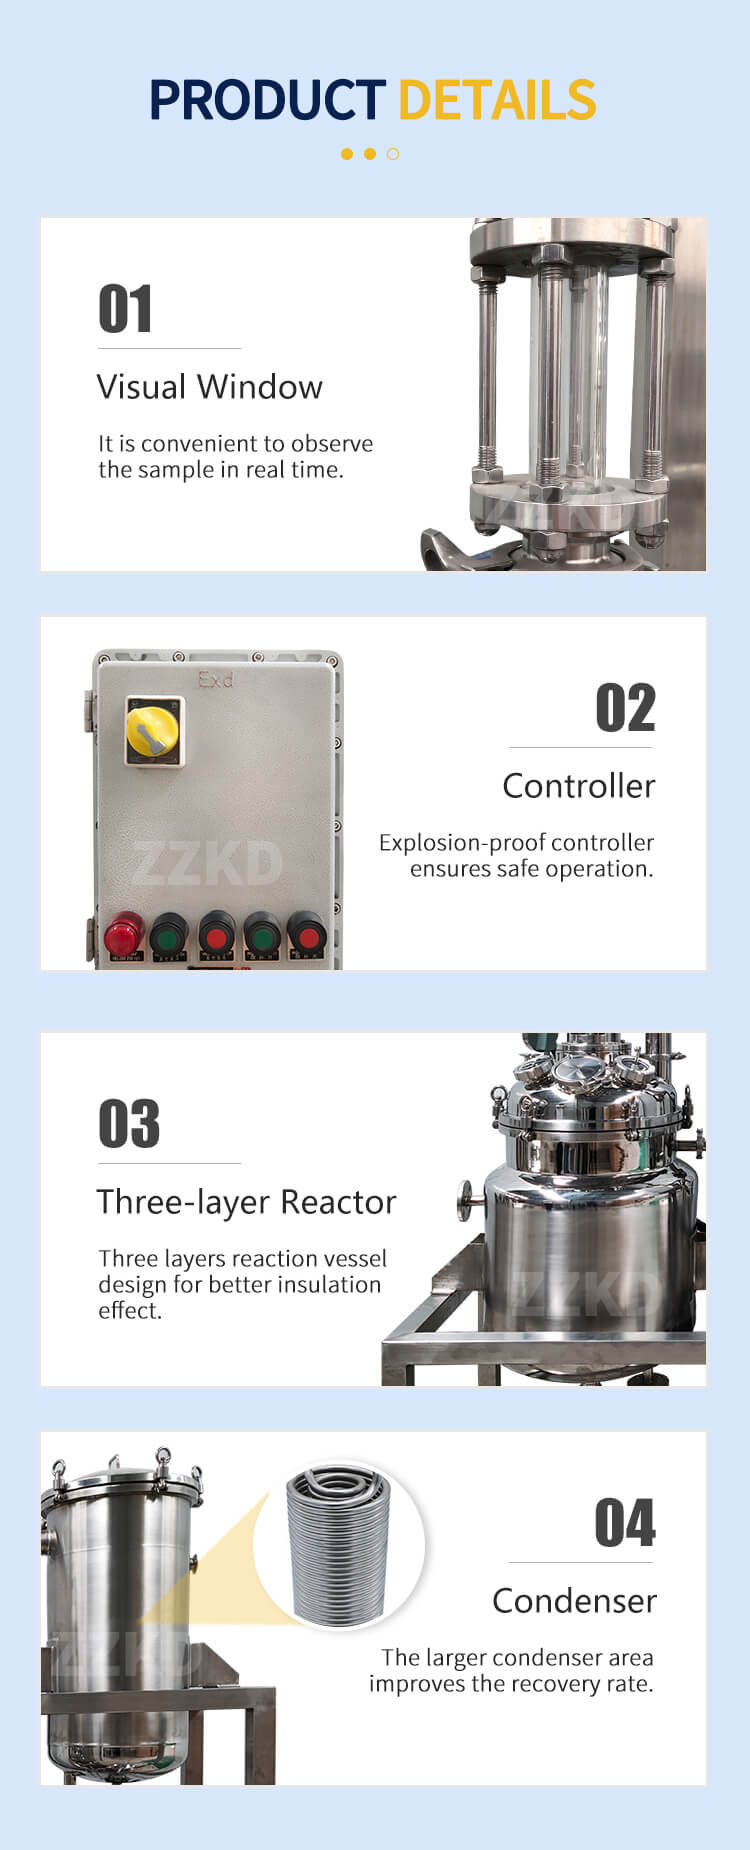 Decarboxylation Reactor Details